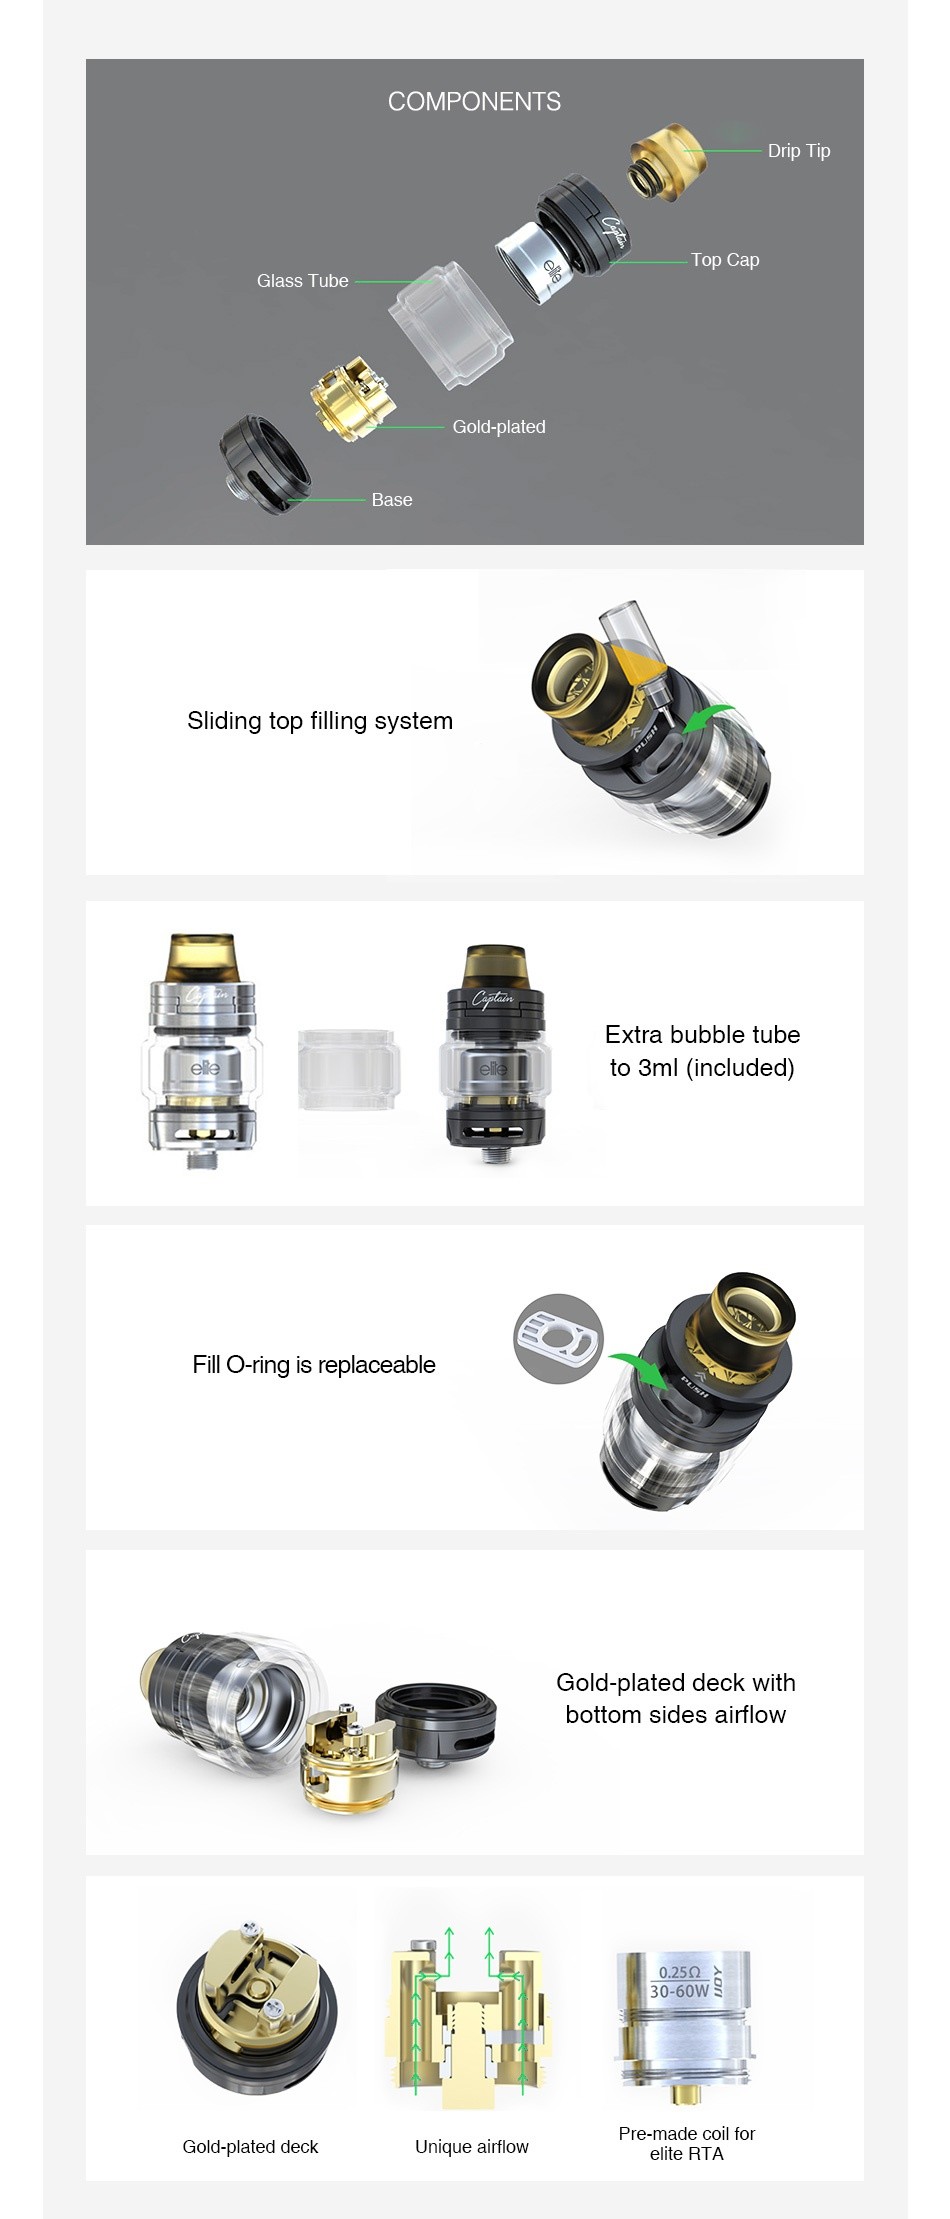 IJOY Captain Elite RTA 2ml/3ml COMPONENTS Glass Tube Gold plated Sliding top filling system Extra bubble tube to 3ml  included  Fill O ring is replaceable Gold  plated deck with bottom sides airflow 0 259 30 60W Pre made coil Gold plated deck Unique airflow clit Rta